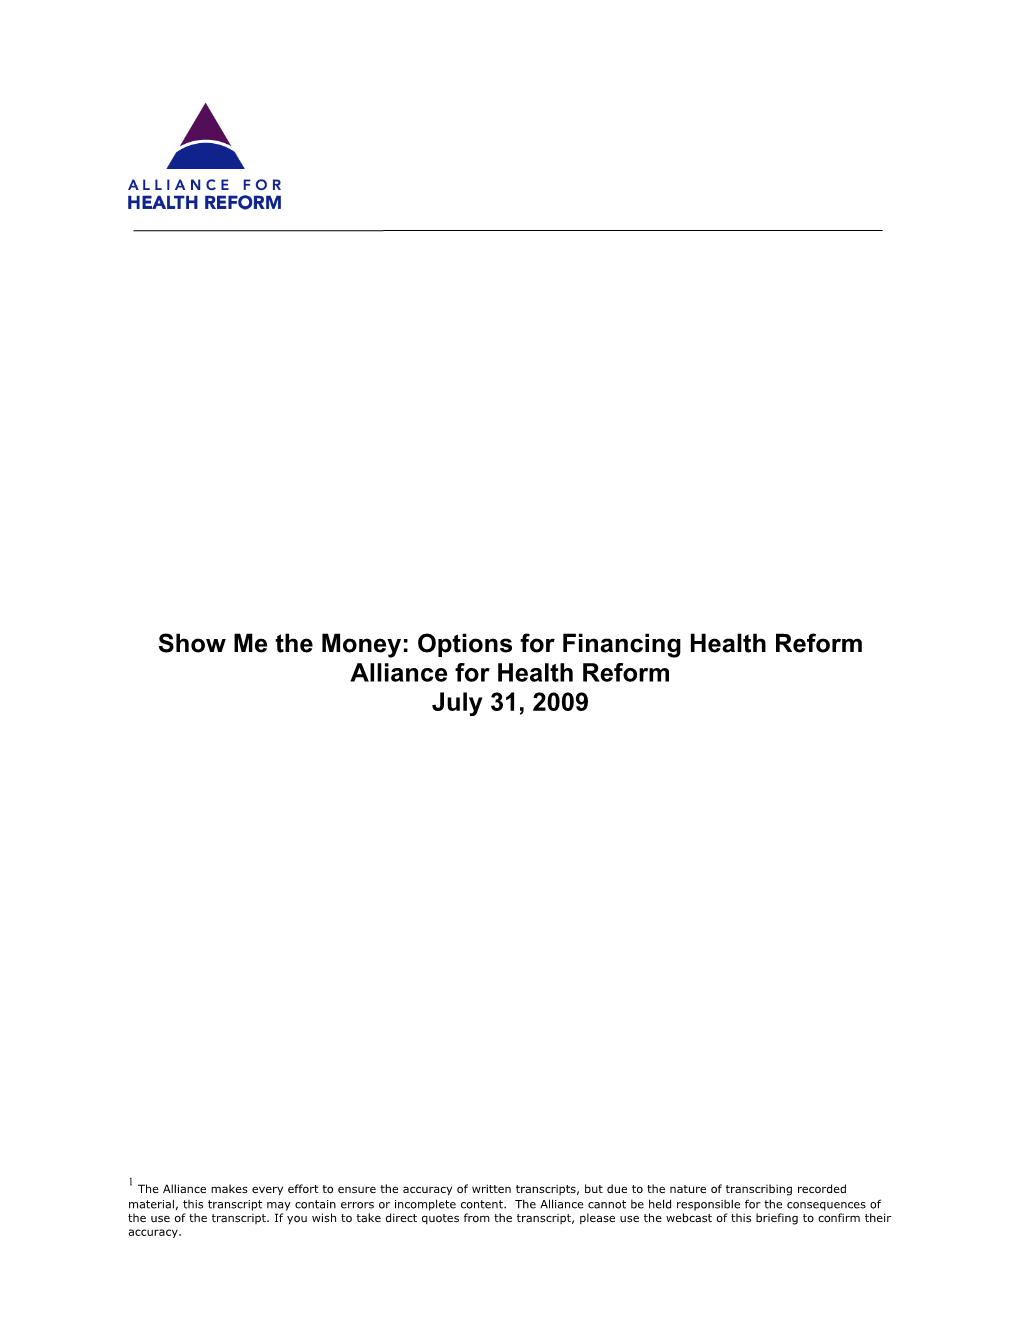 Transcript: Show Me the Money: Options for Financing Health Reform